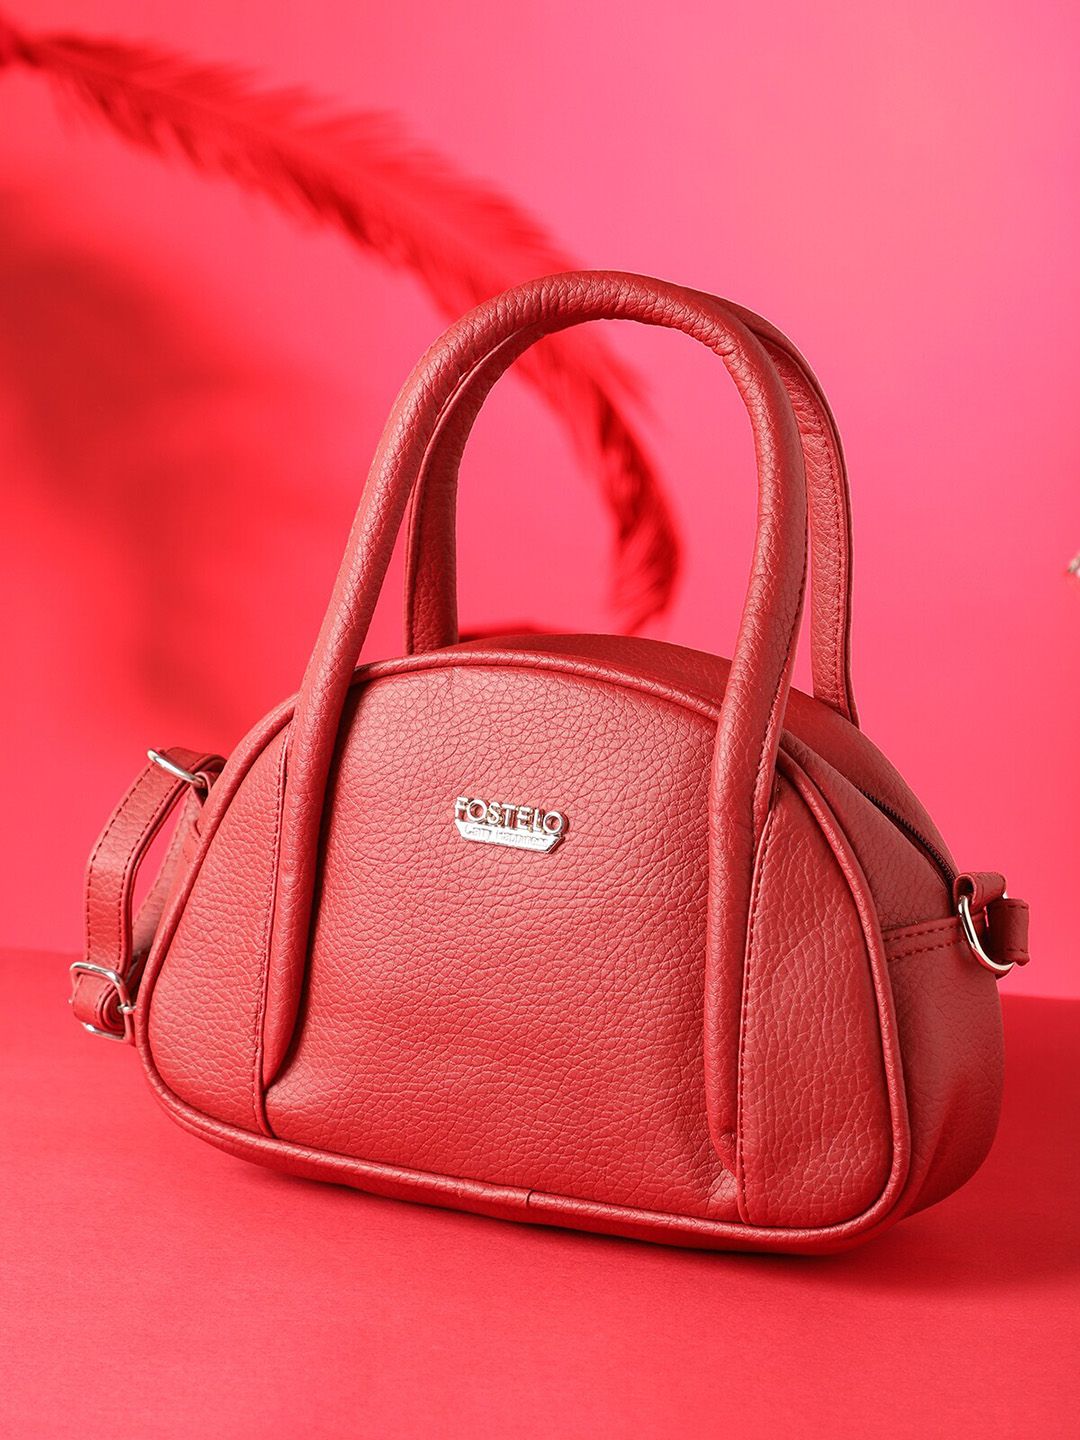 Fostelo Maroon PU Structured Handheld Bag with Tasselled Price in India